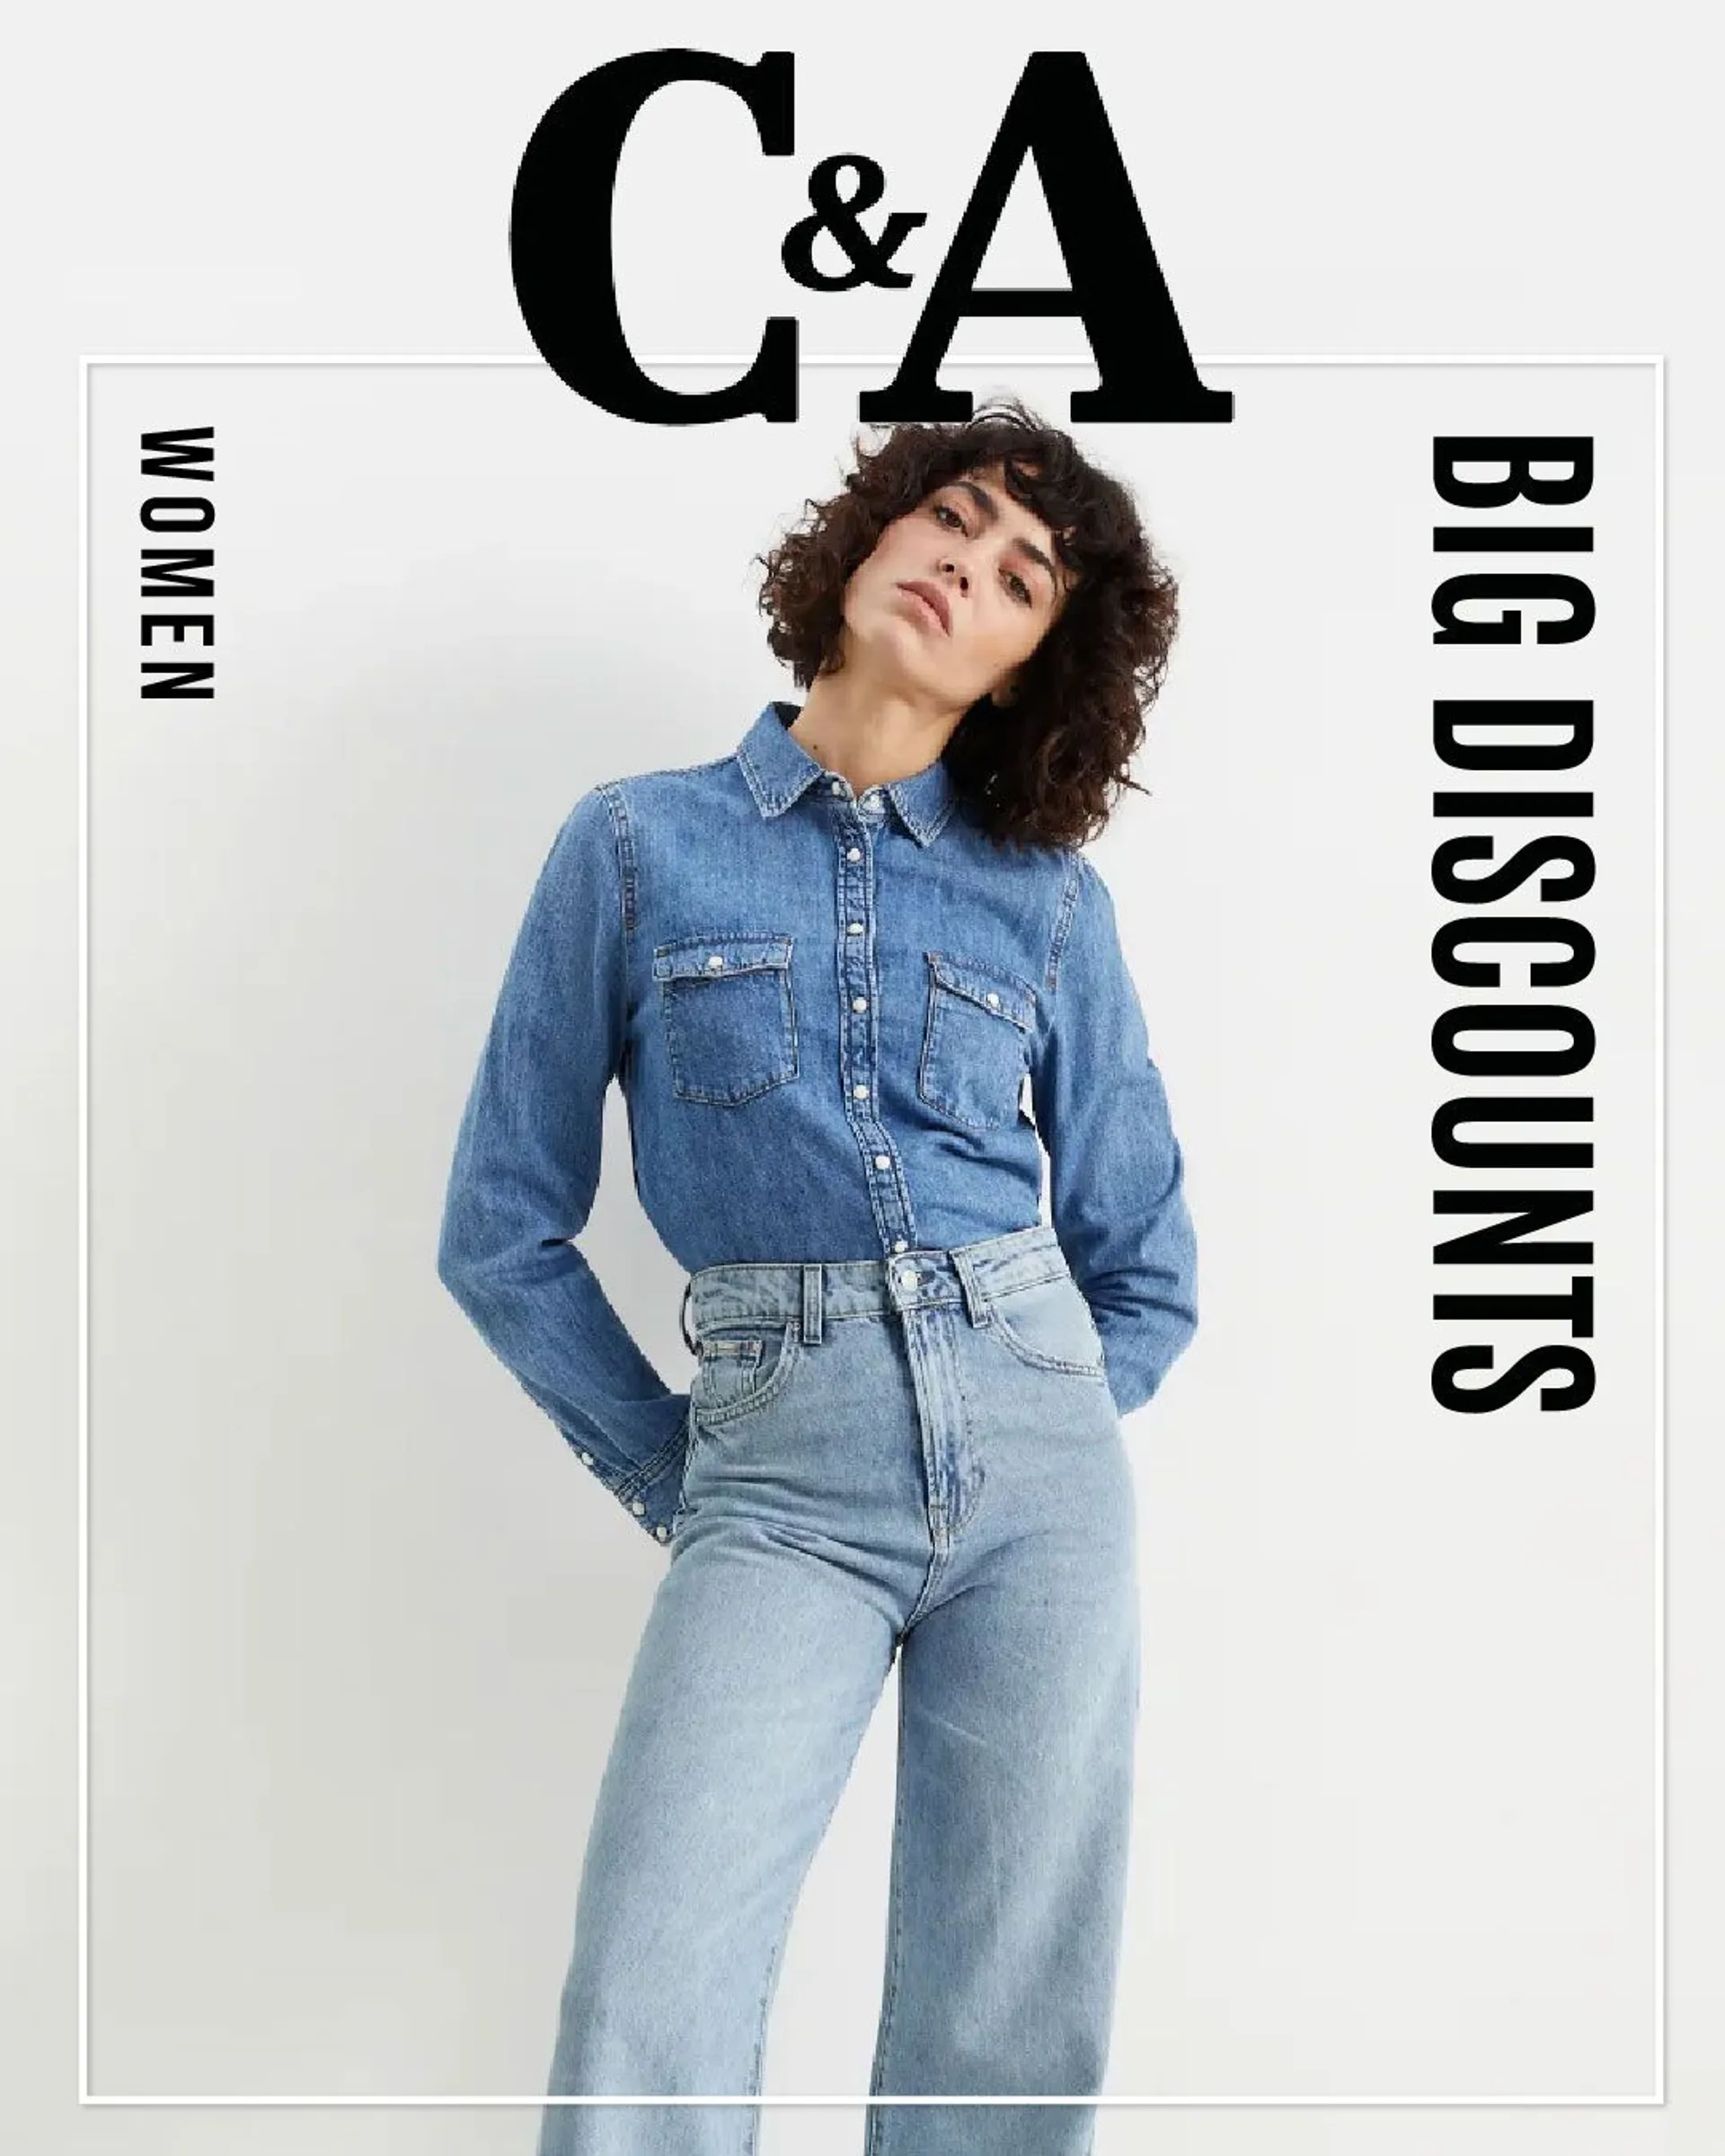 C&A offers in women's fashion from 16 June to 21 June 2024 - Catalogue Page 1